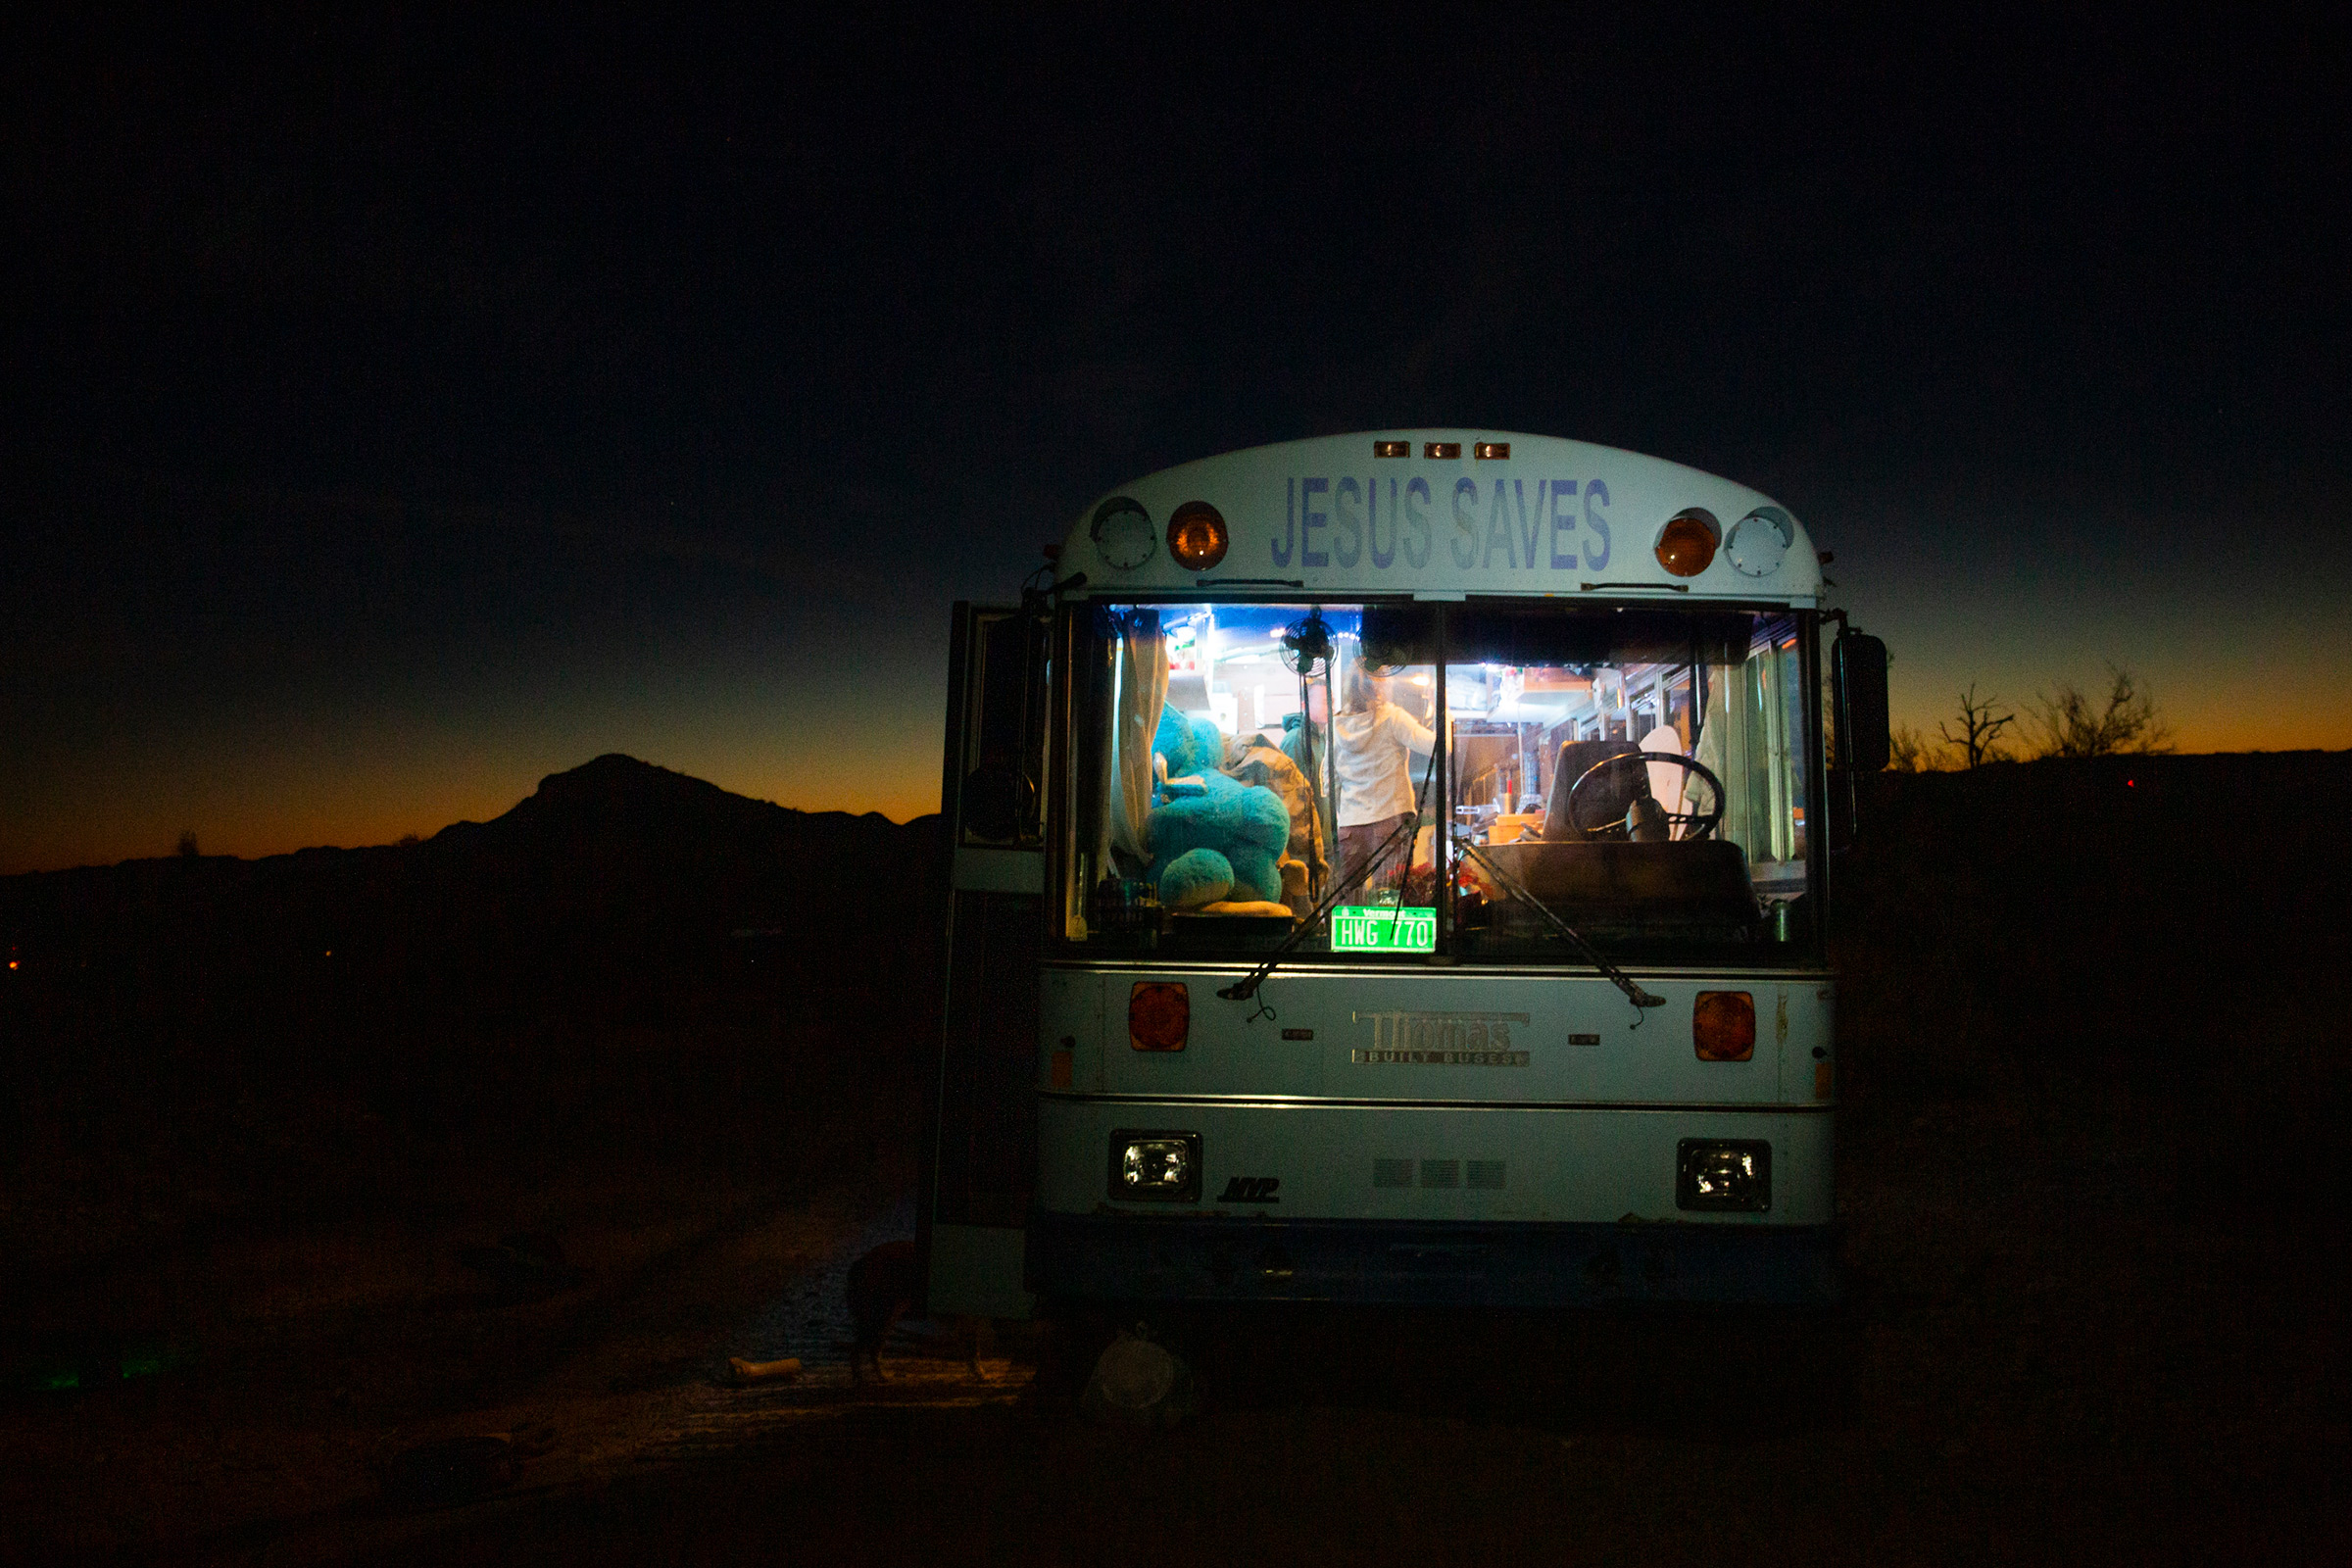 Paula and Max’s ‘Jesus Saves’ bus provides warmth on cold desert nights outside Lake Havasu City, Az., on Feb. 23. Paula was raised Jewish and does not identify as Christian; she found the retired Baptist school bus in San Diego last year and it fit within her budget. (Nina Riggio for TIME)